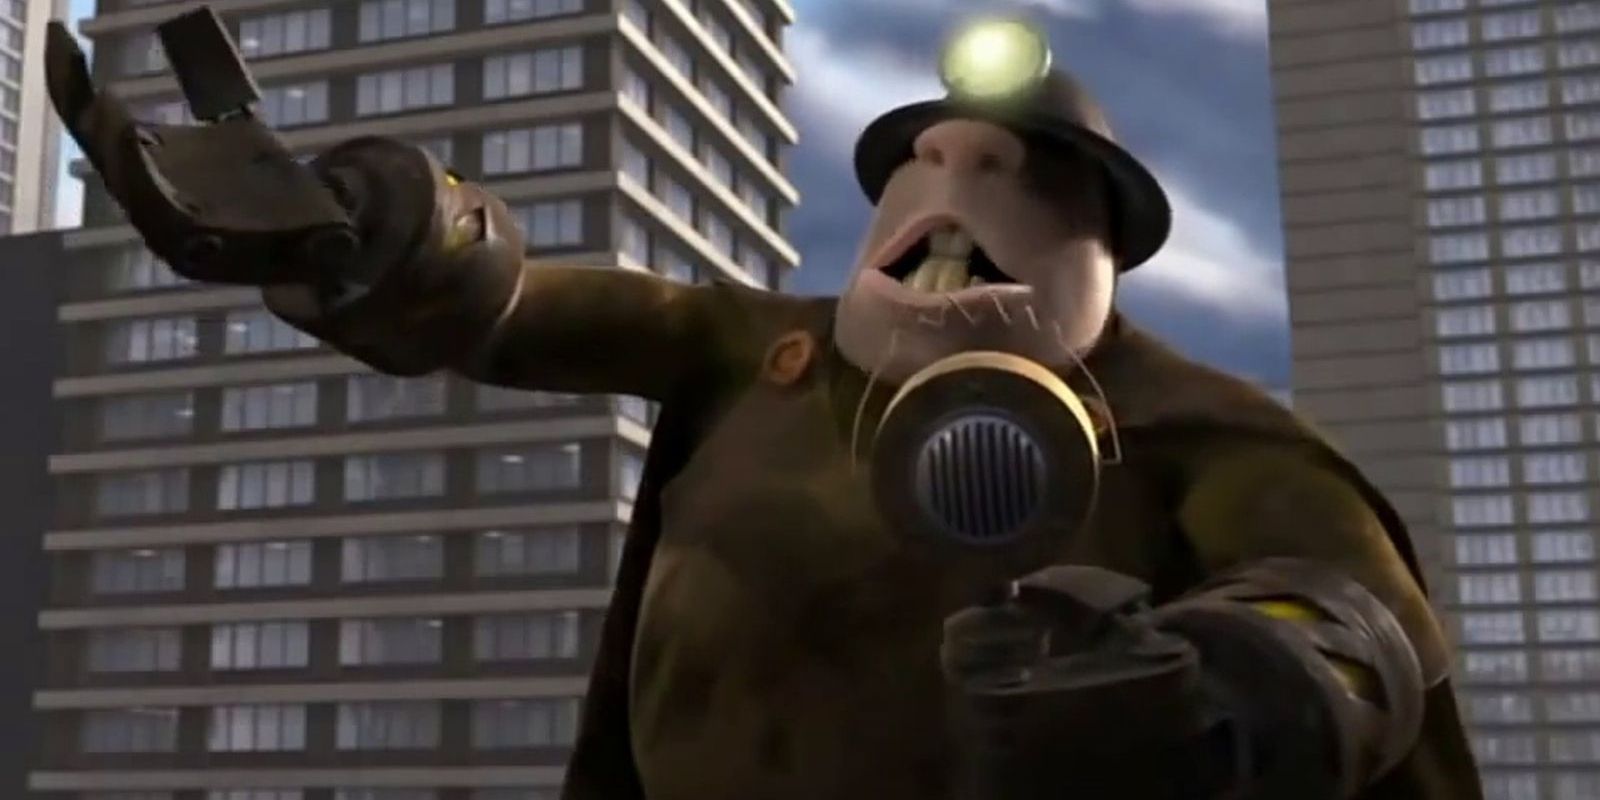 The Underminer attacks the city in The Incredibles